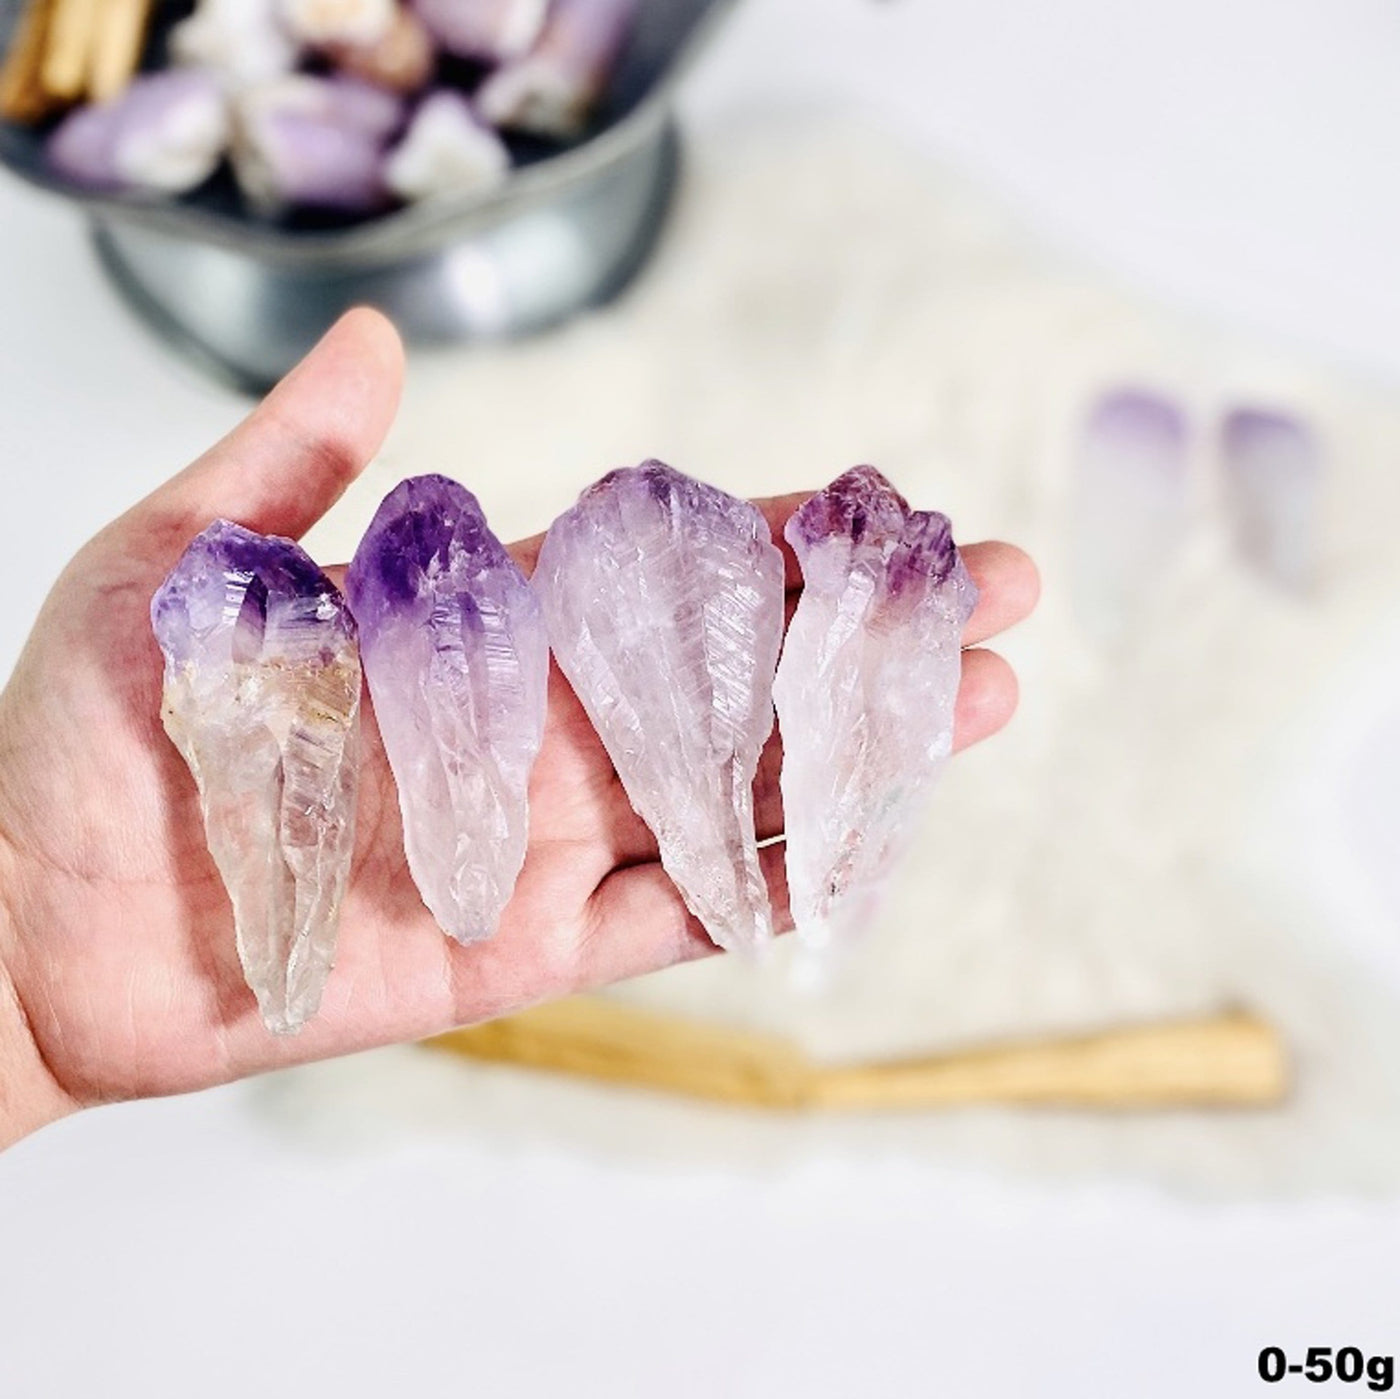 4 amethyst points in a hand